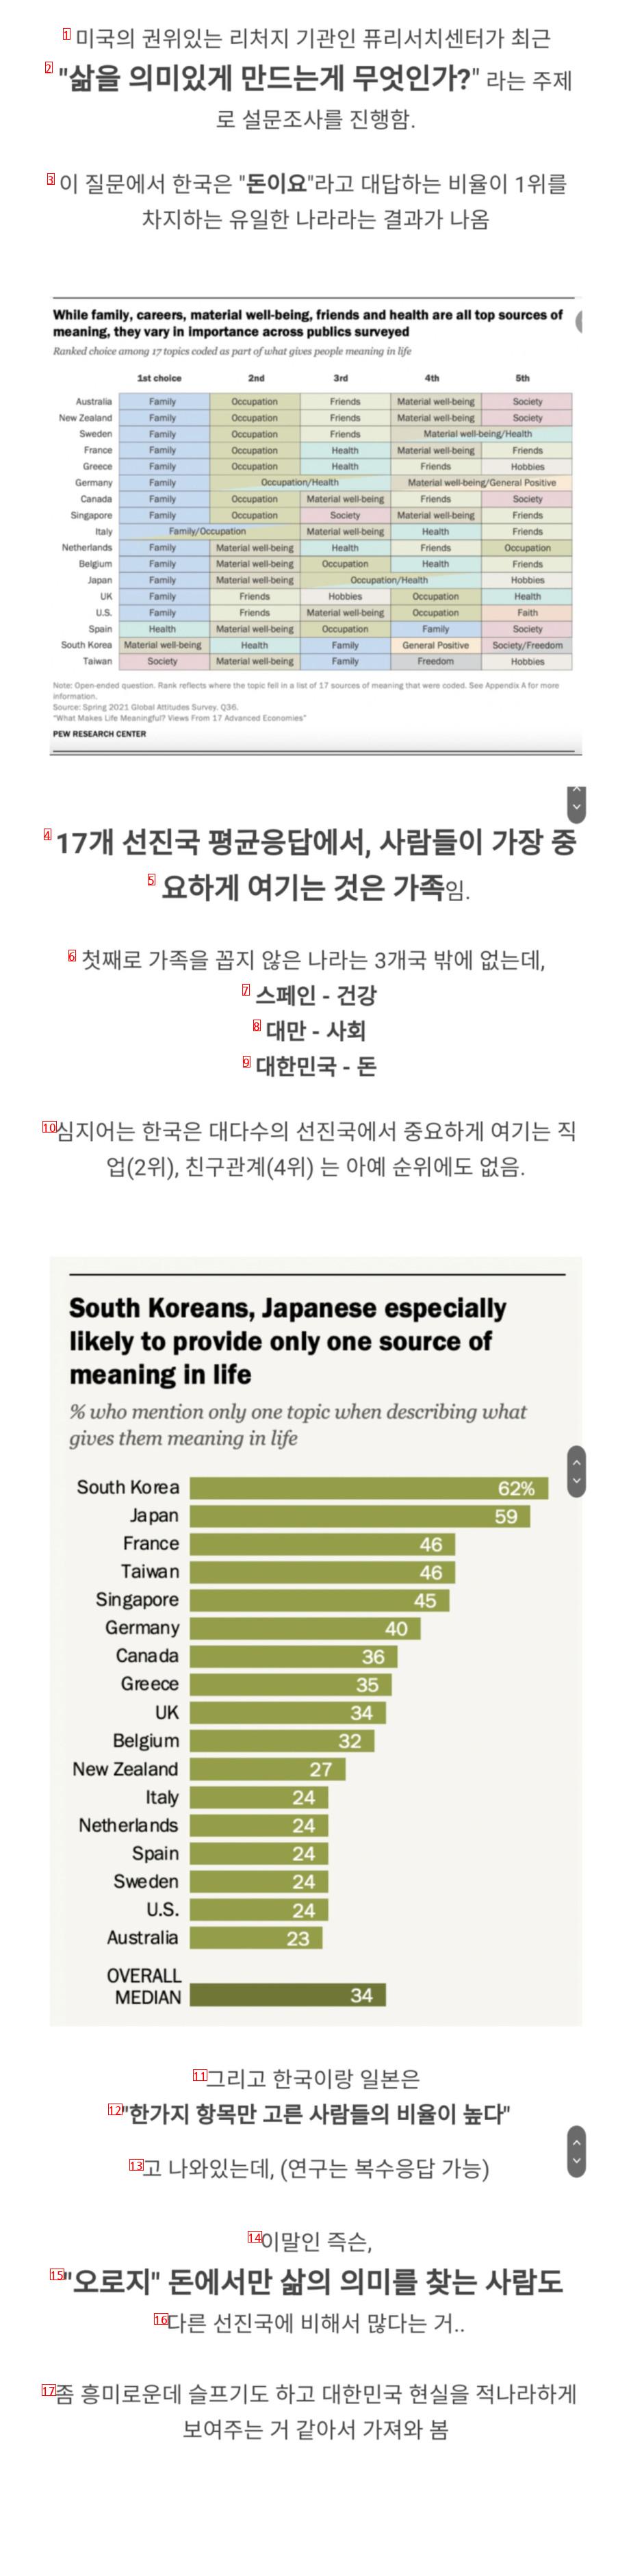 Korea Seeks the Meaning of Life Only in Money